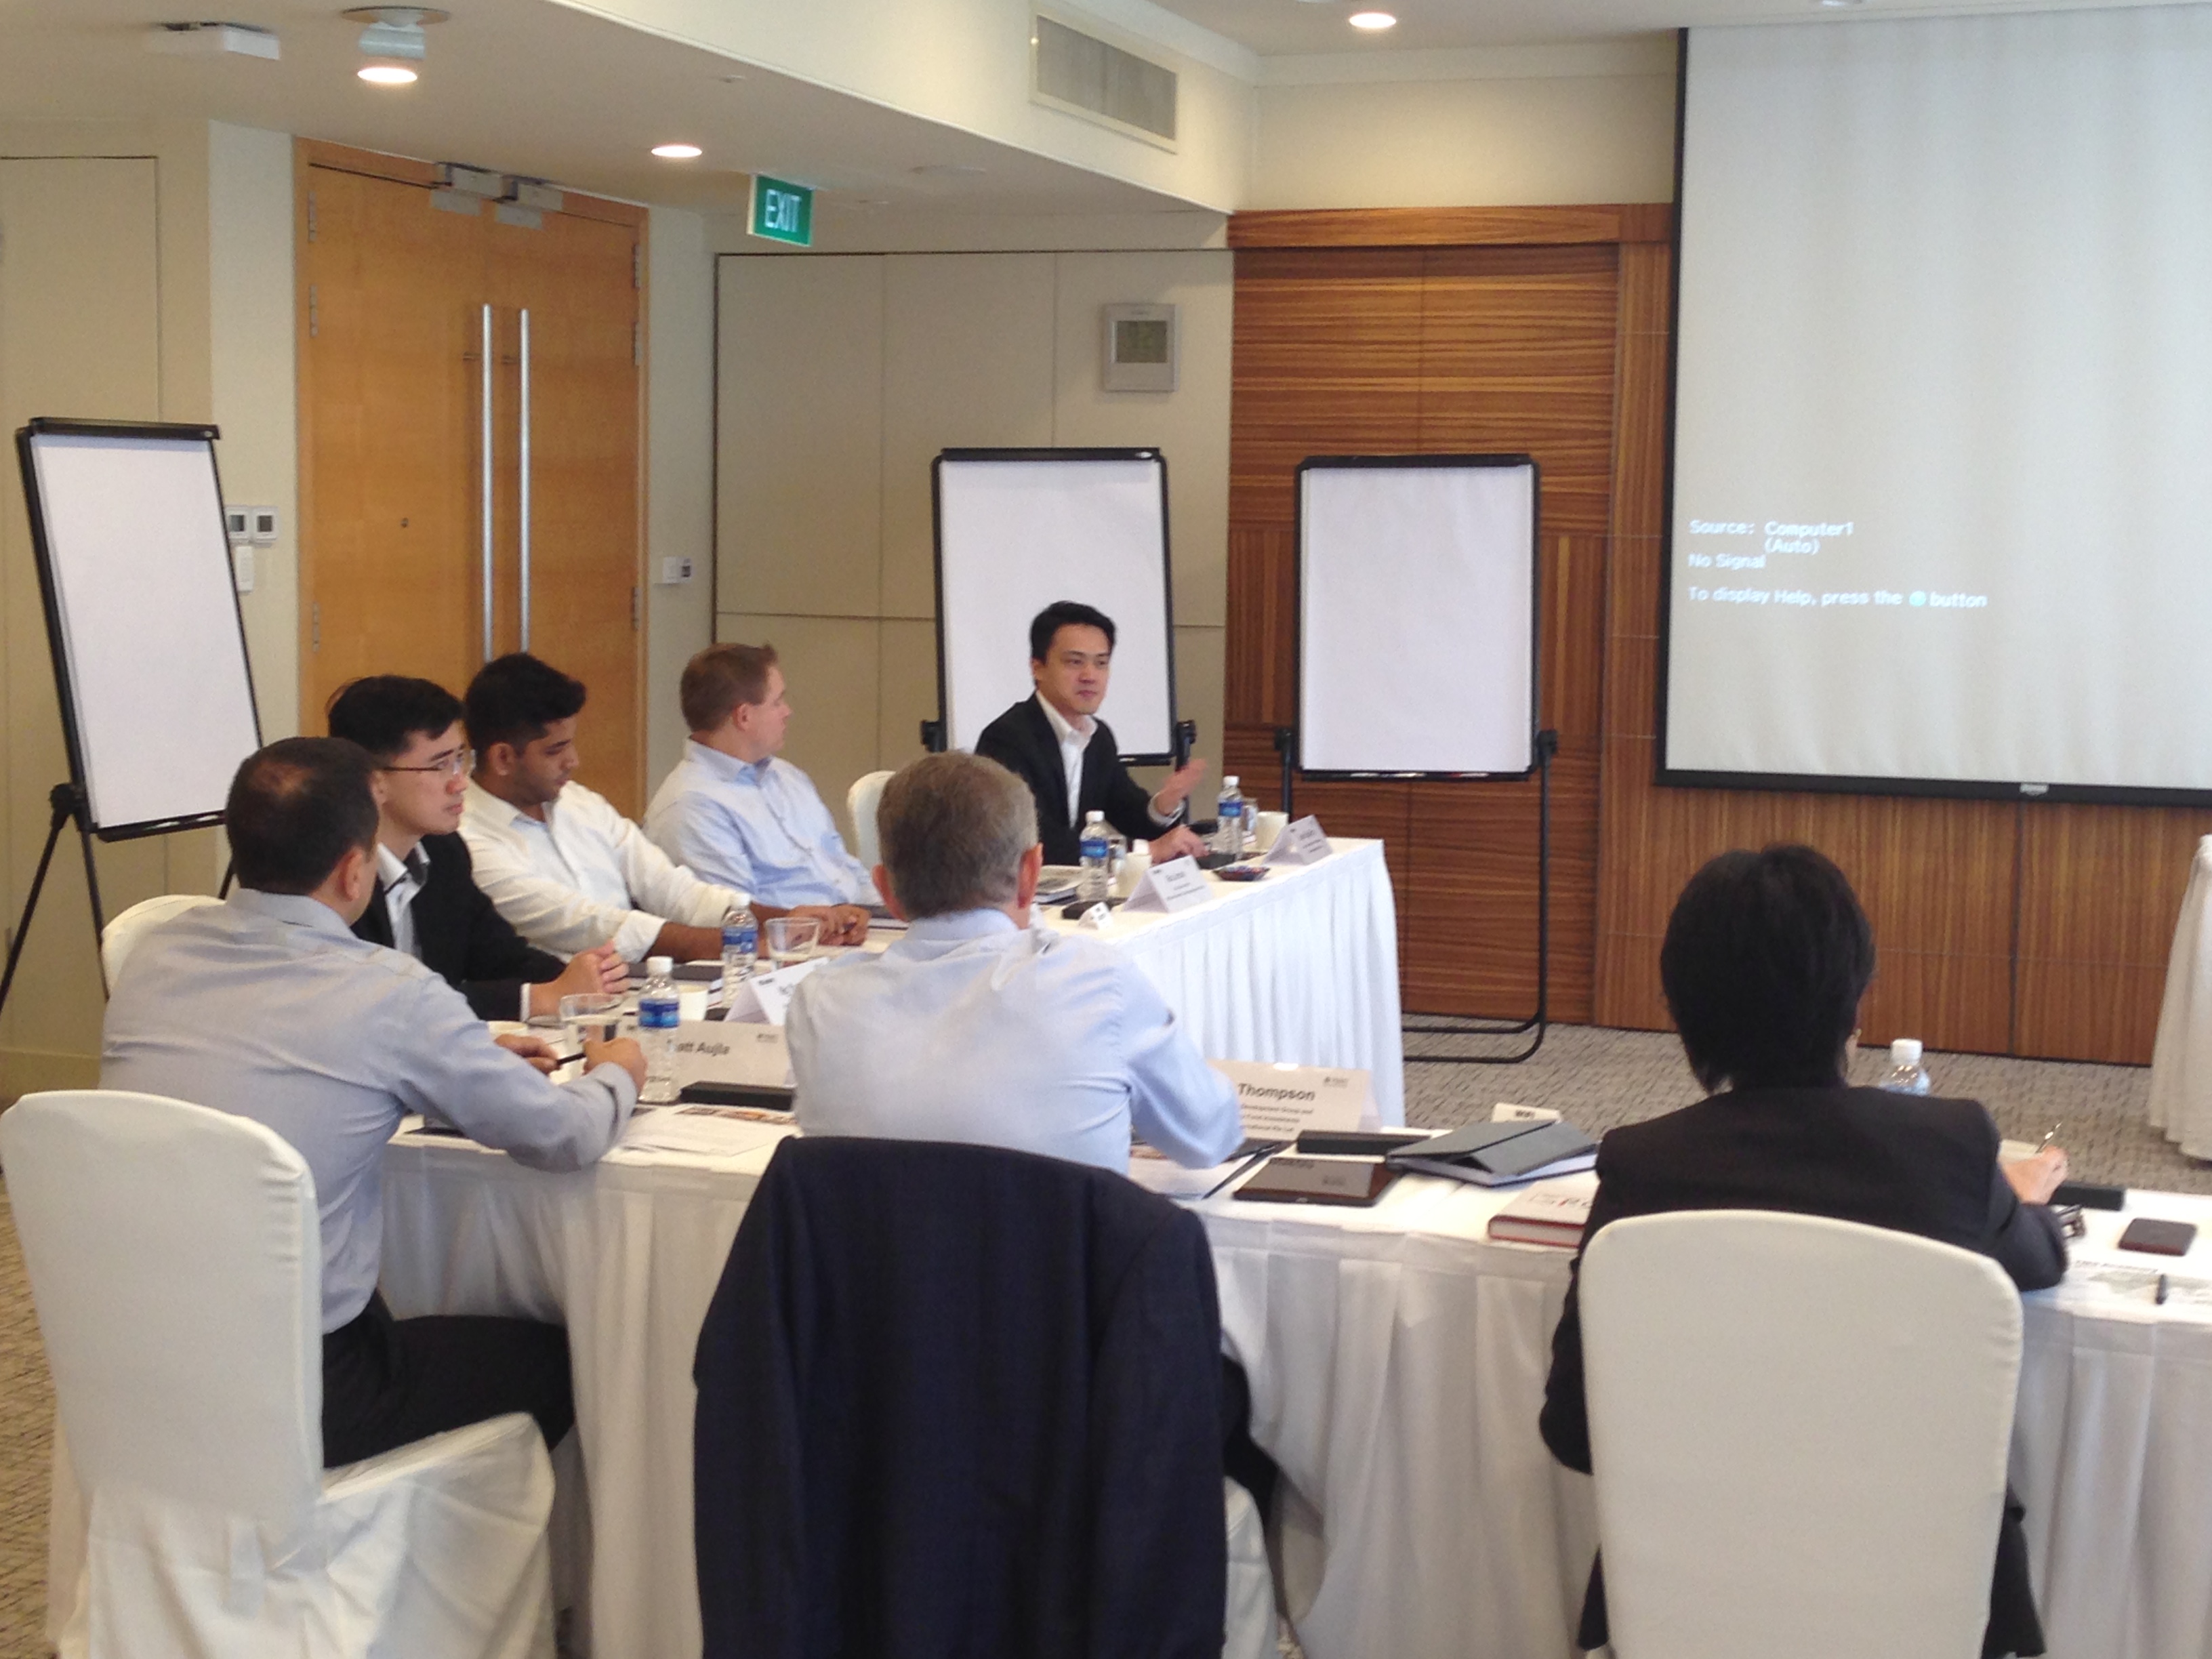 Global Innovators’ Roundtable participates discuss sustainability innovation challenges